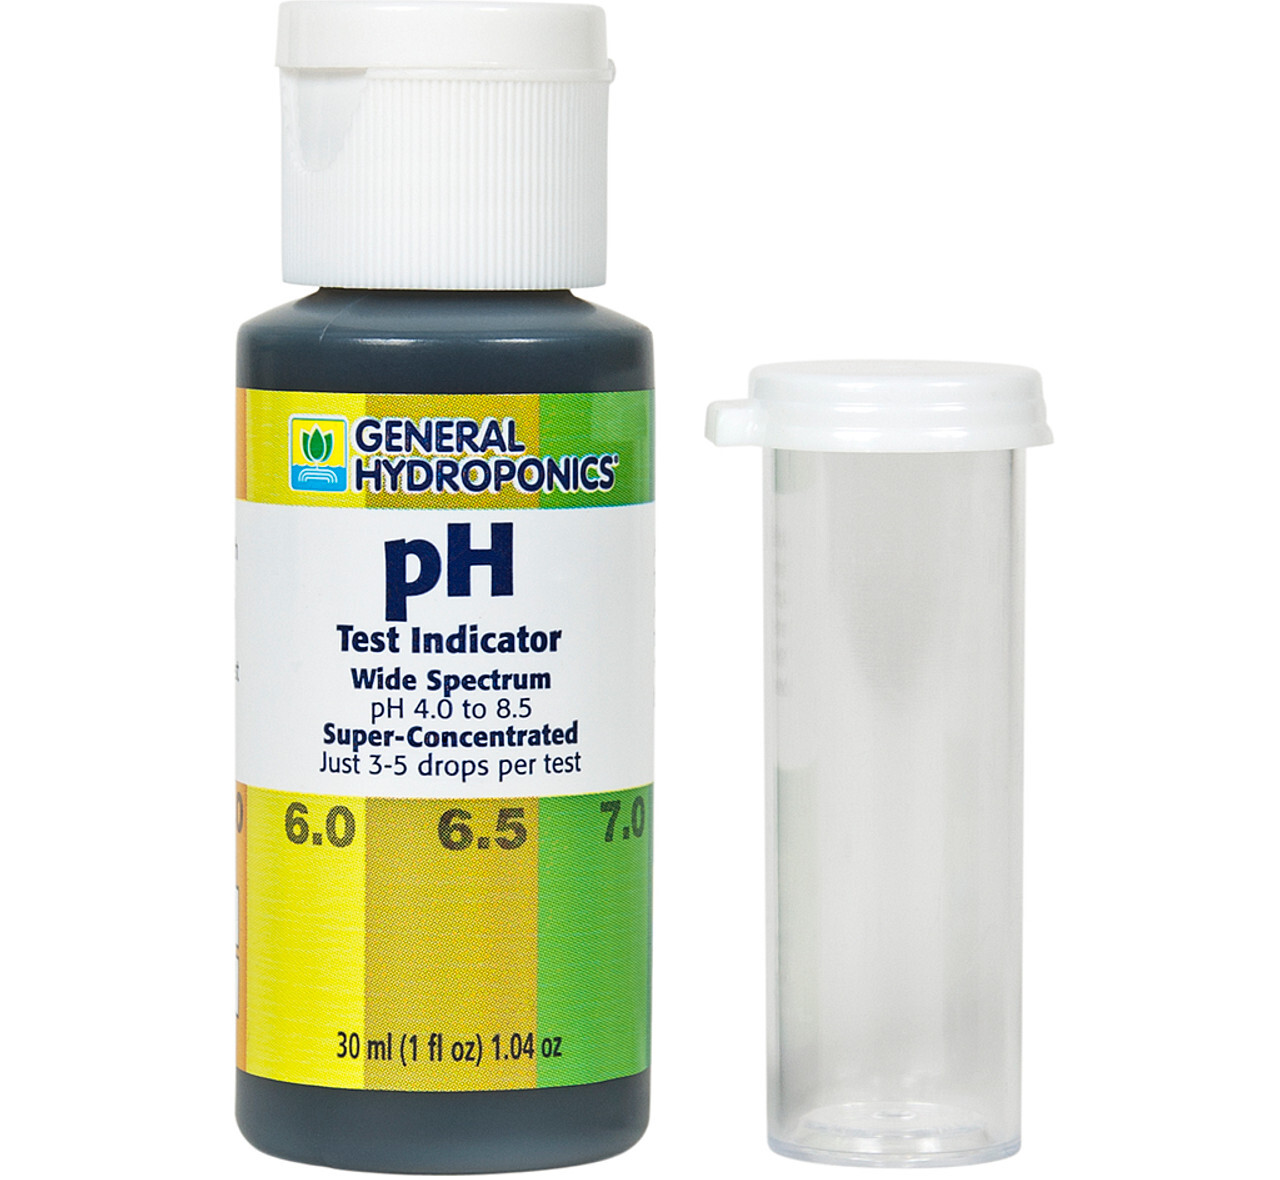 11 Best General Hydroponics Ph Tester for 2023